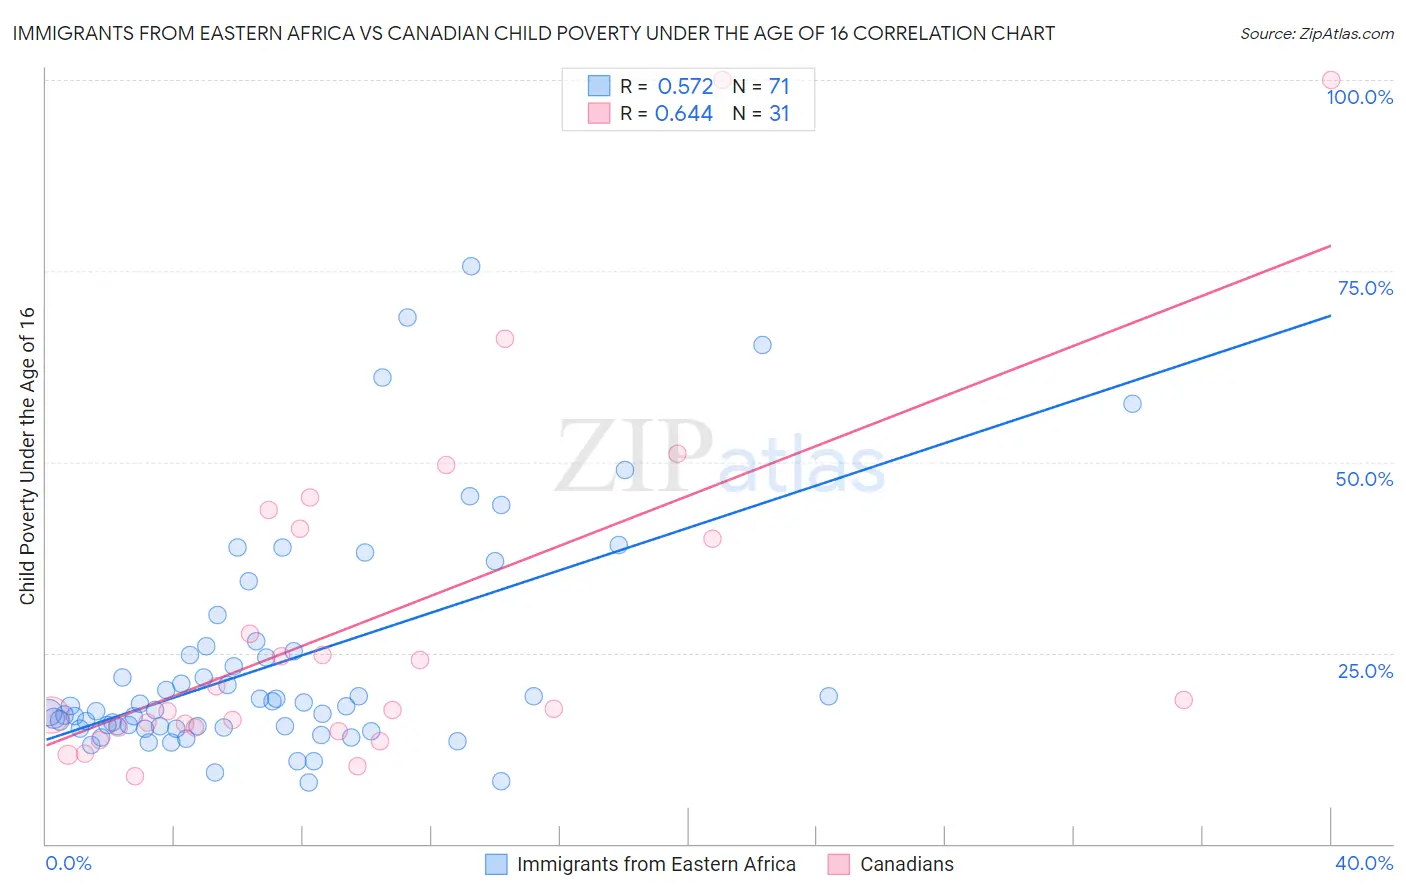 Immigrants from Eastern Africa vs Canadian Child Poverty Under the Age of 16